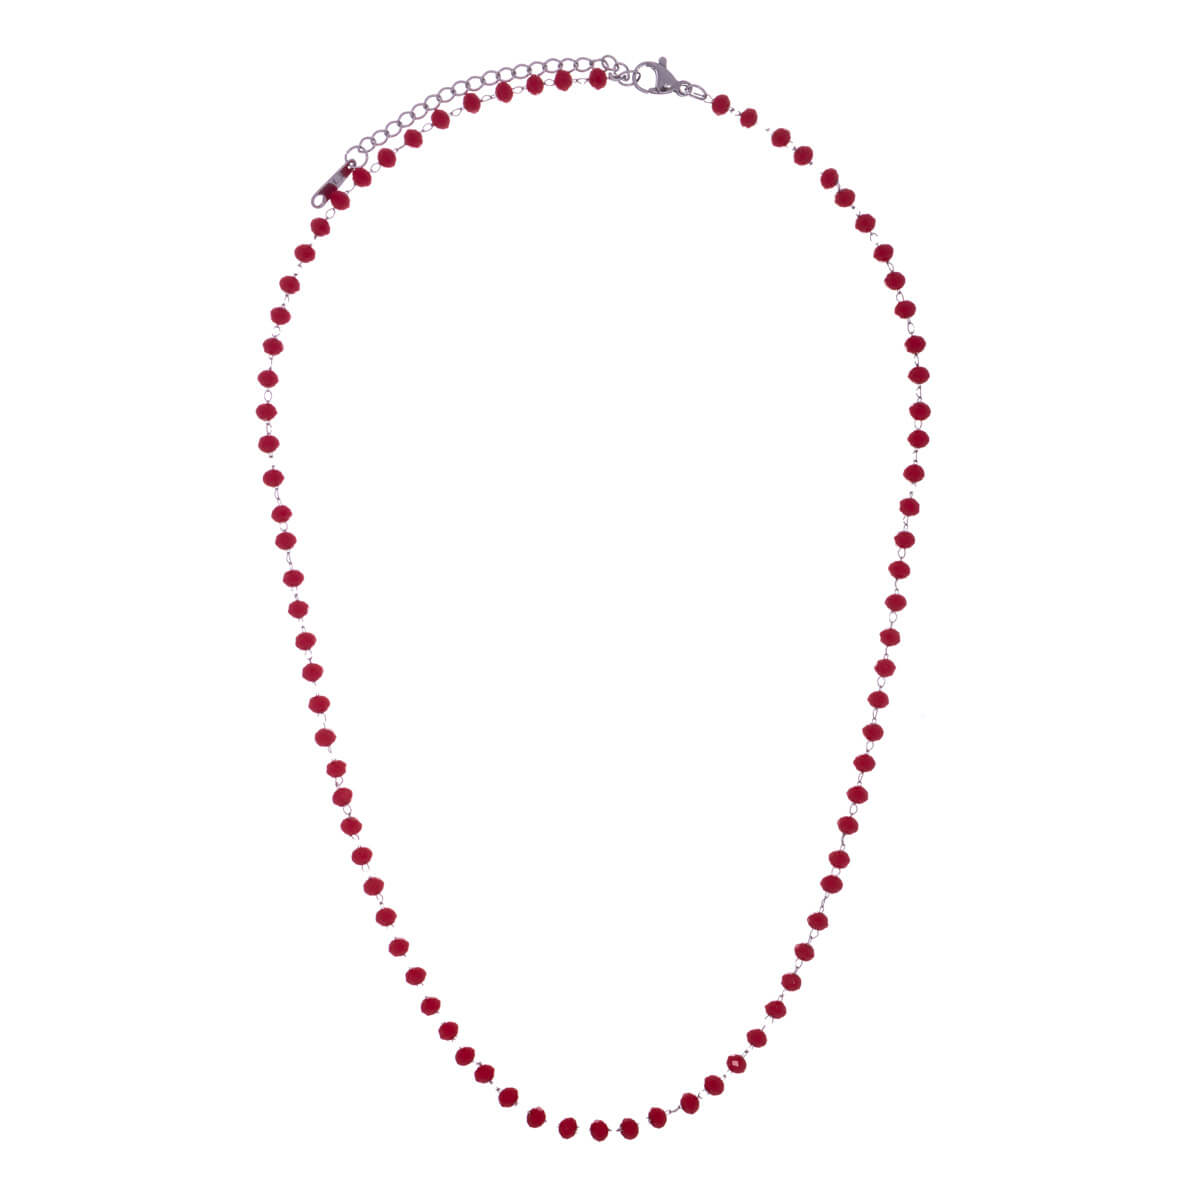 Chamfered pearl steel necklace 43cm (steel 316L)